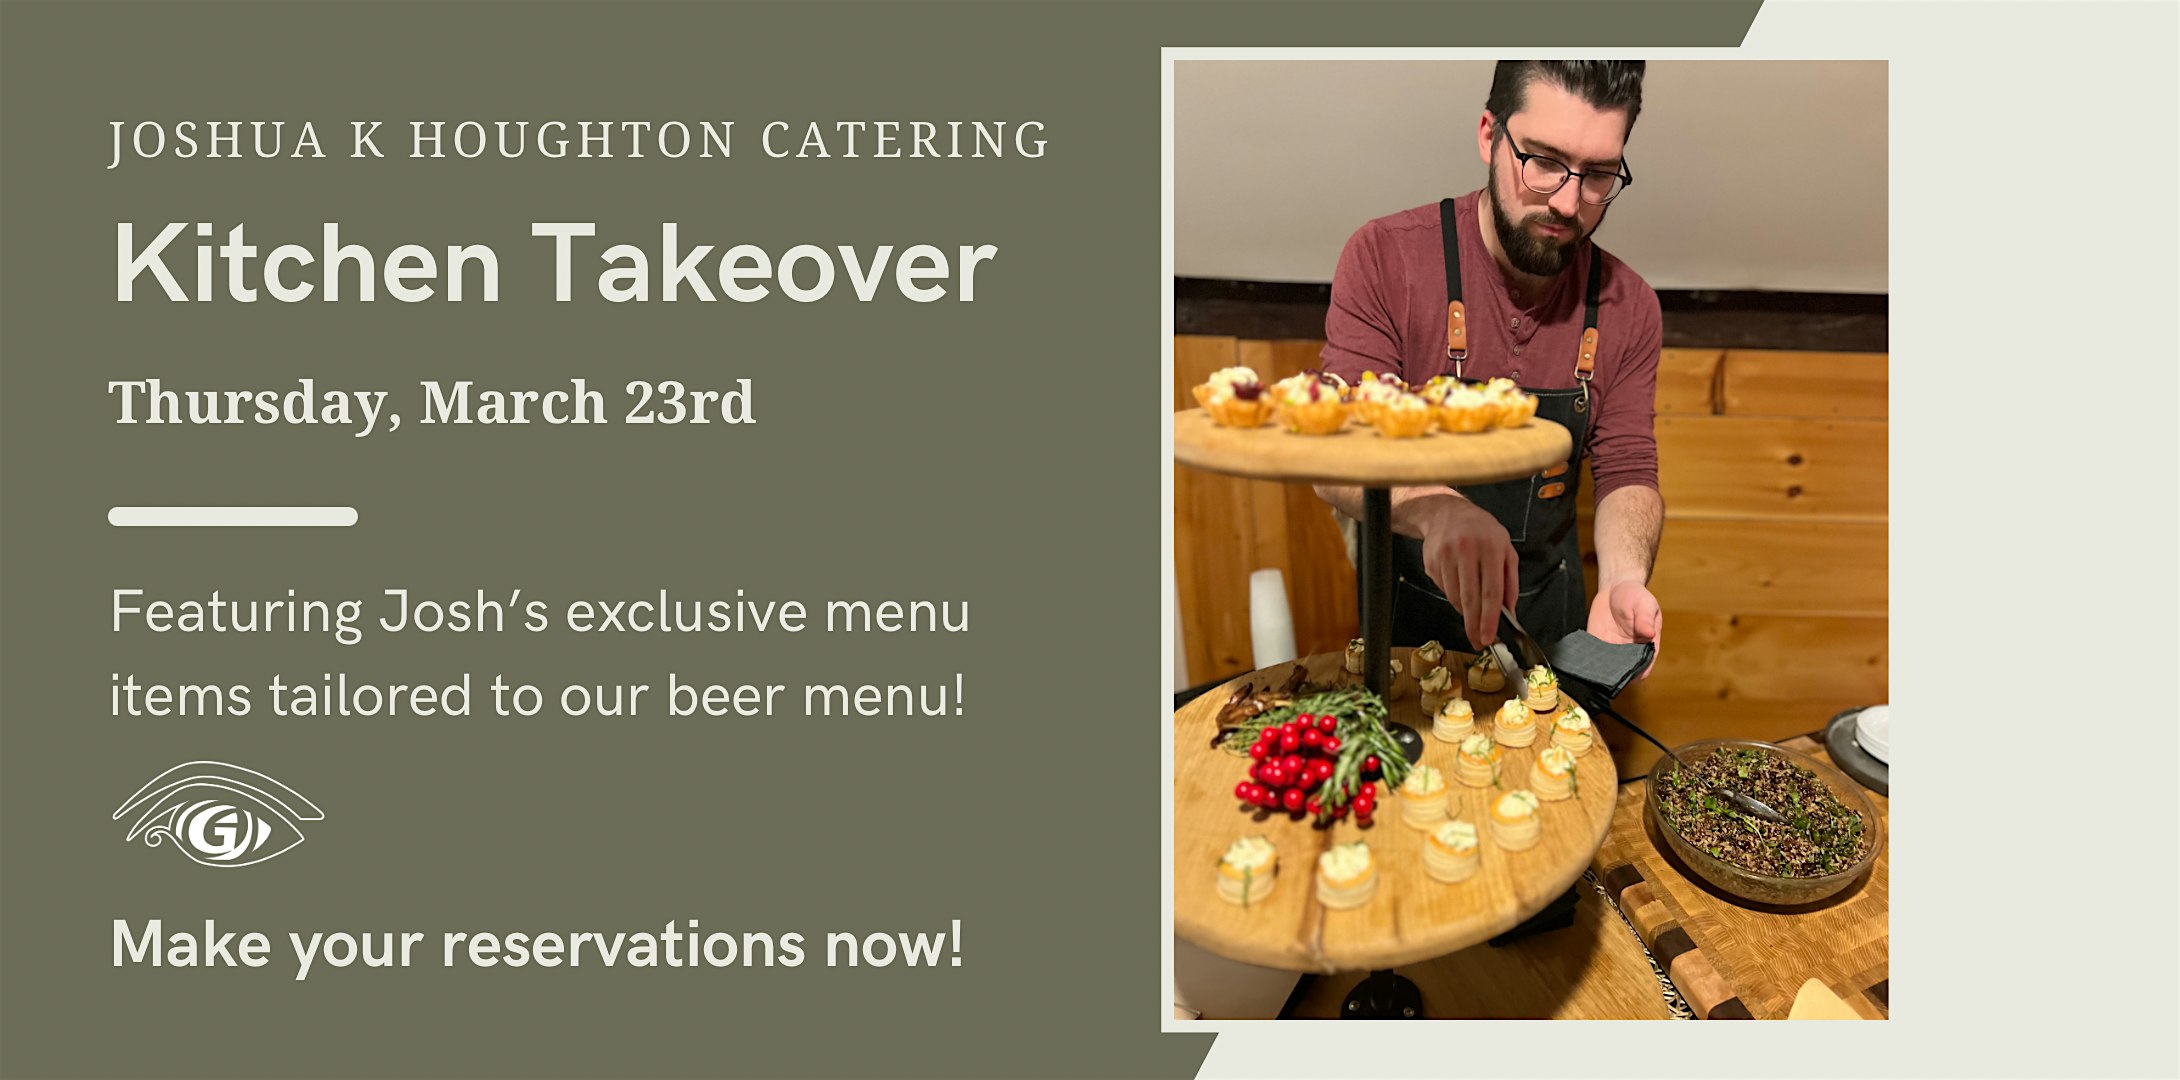 Joshua Houghton Kitchen Takeover (Reservations Suggested)